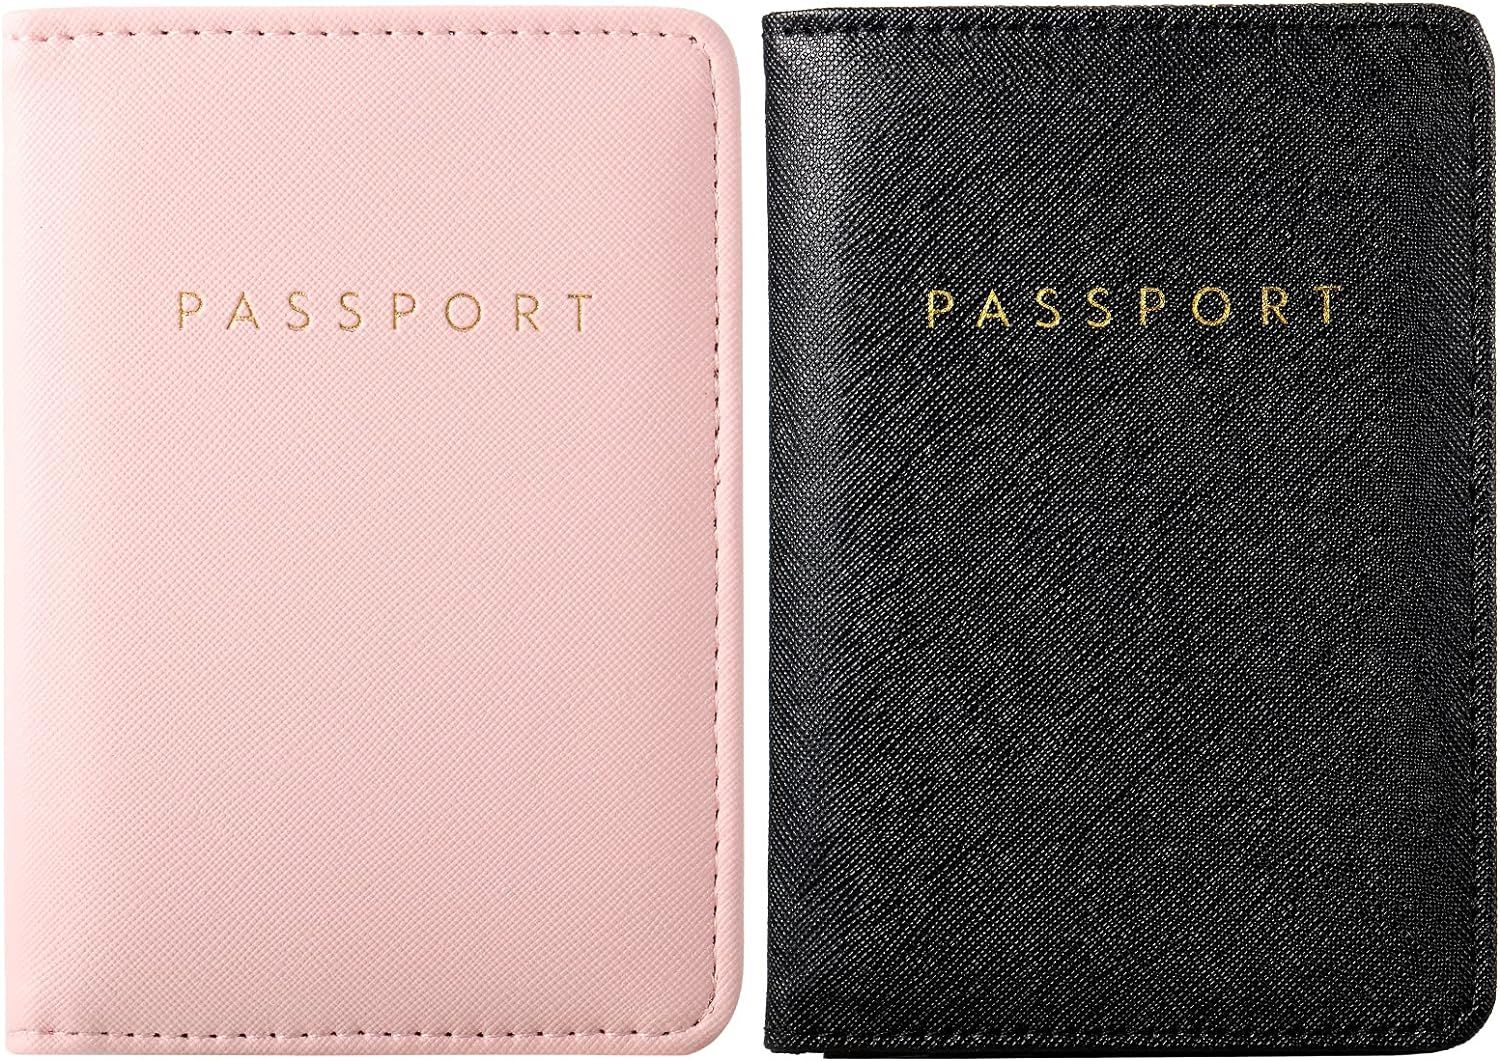 2 Pieces Bridal Passport Covers Holder Travel Wallet Passport Case (Pink and Black) | Amazon (US)